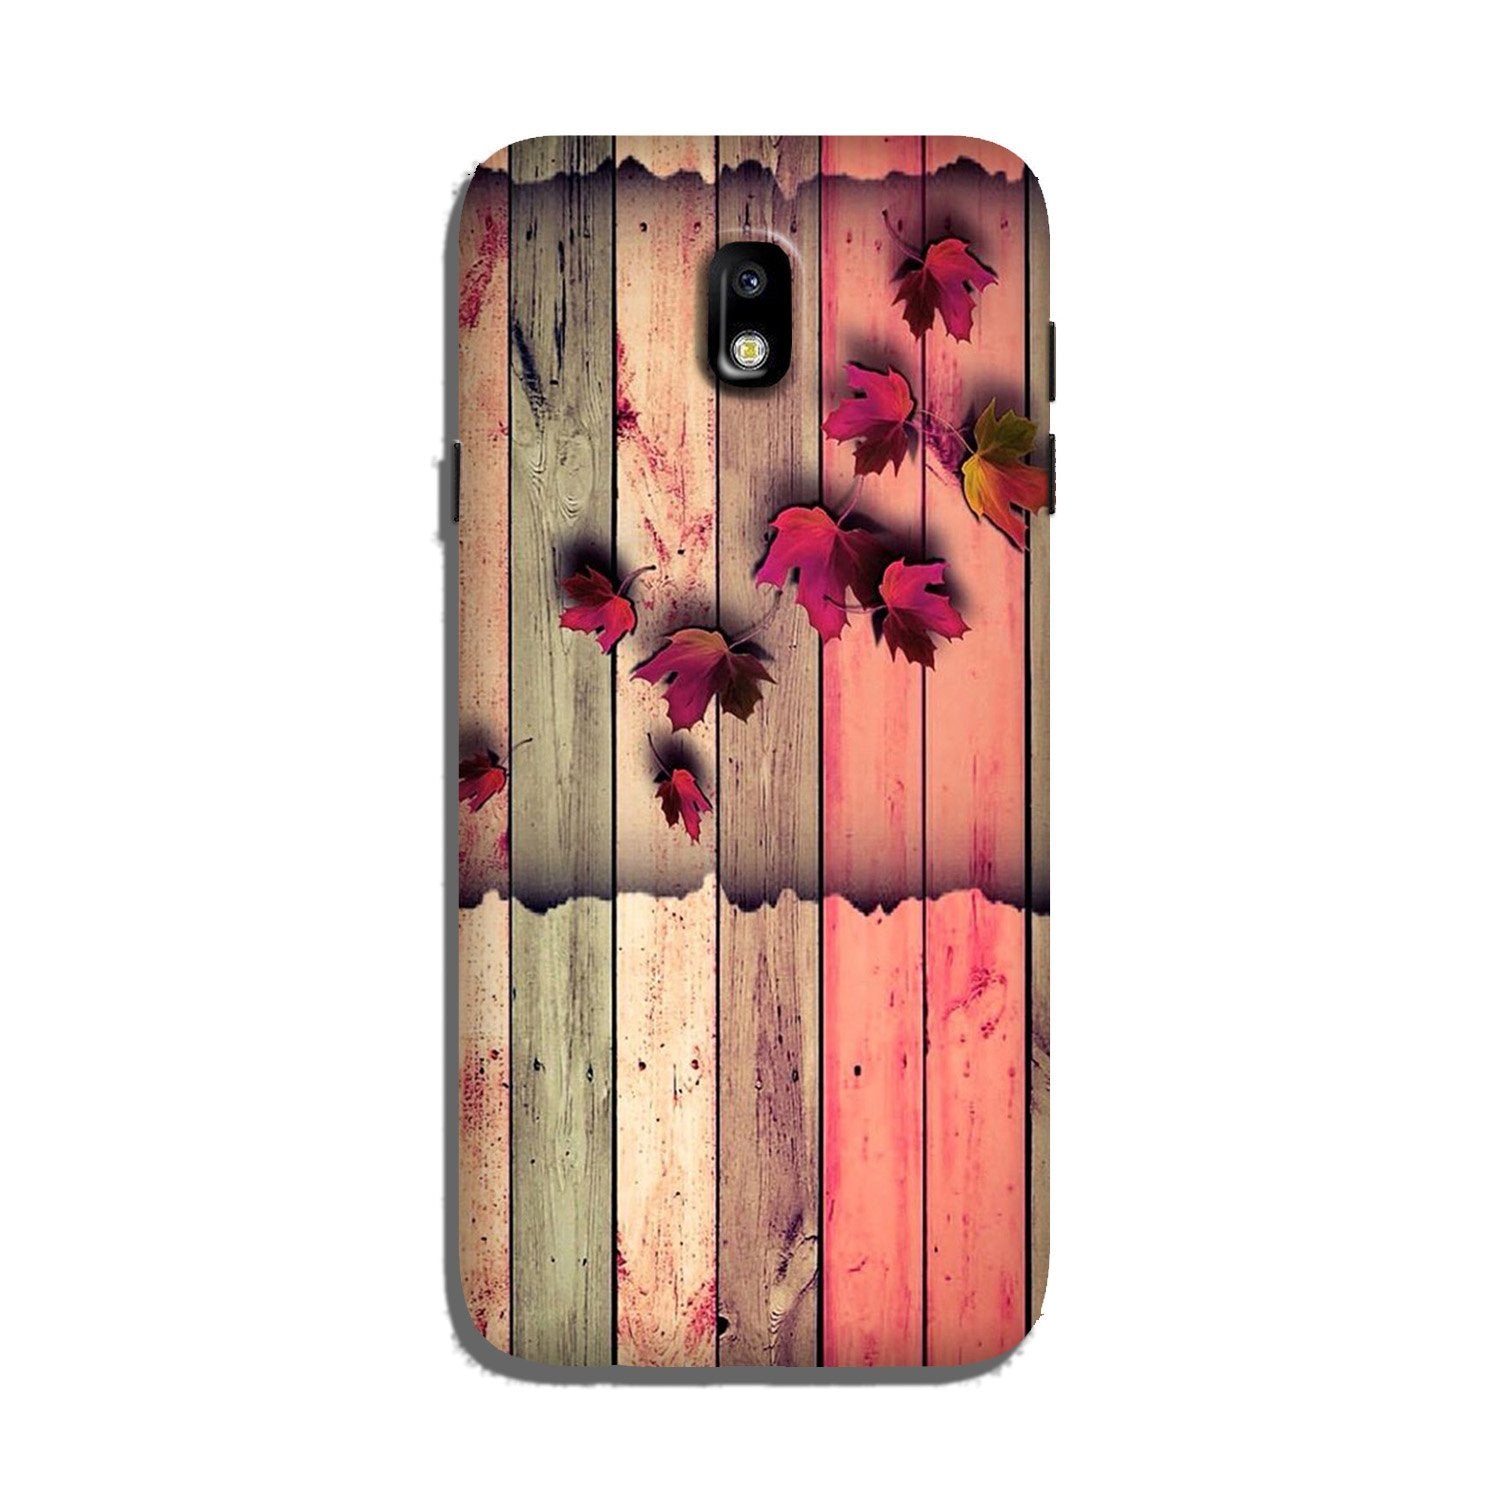 Wooden look2 Case for Galaxy J5 Pro